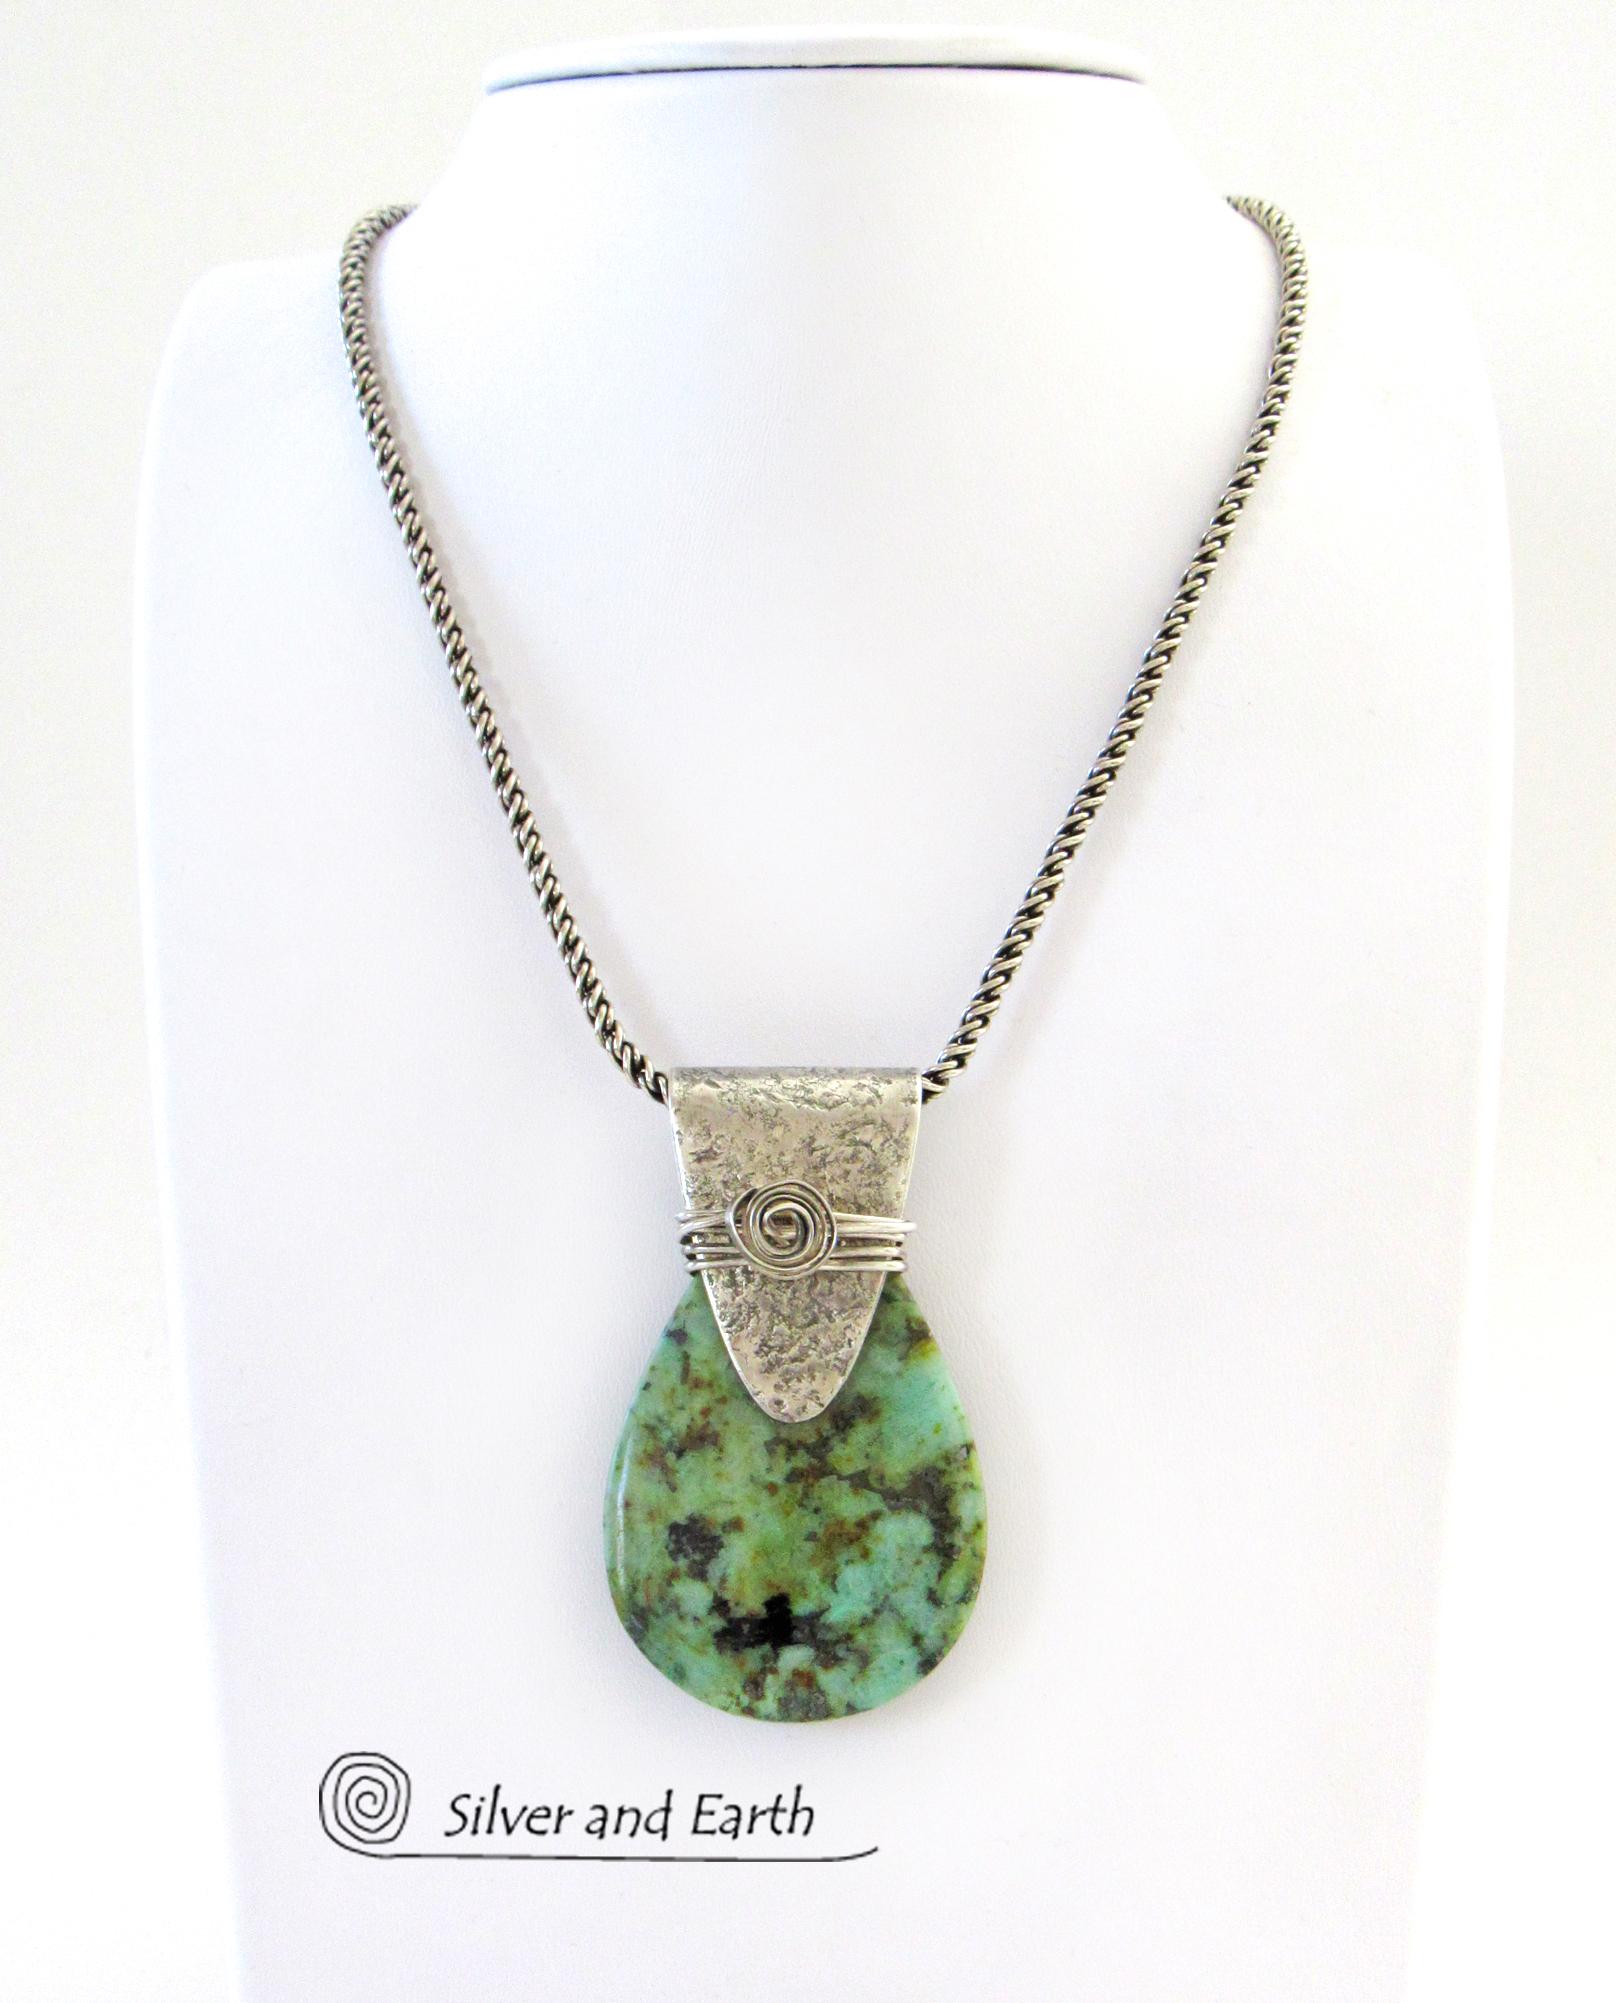 African Turquoise Sterling Silver Necklace - Handcrafted Silver & Stone Jewelry